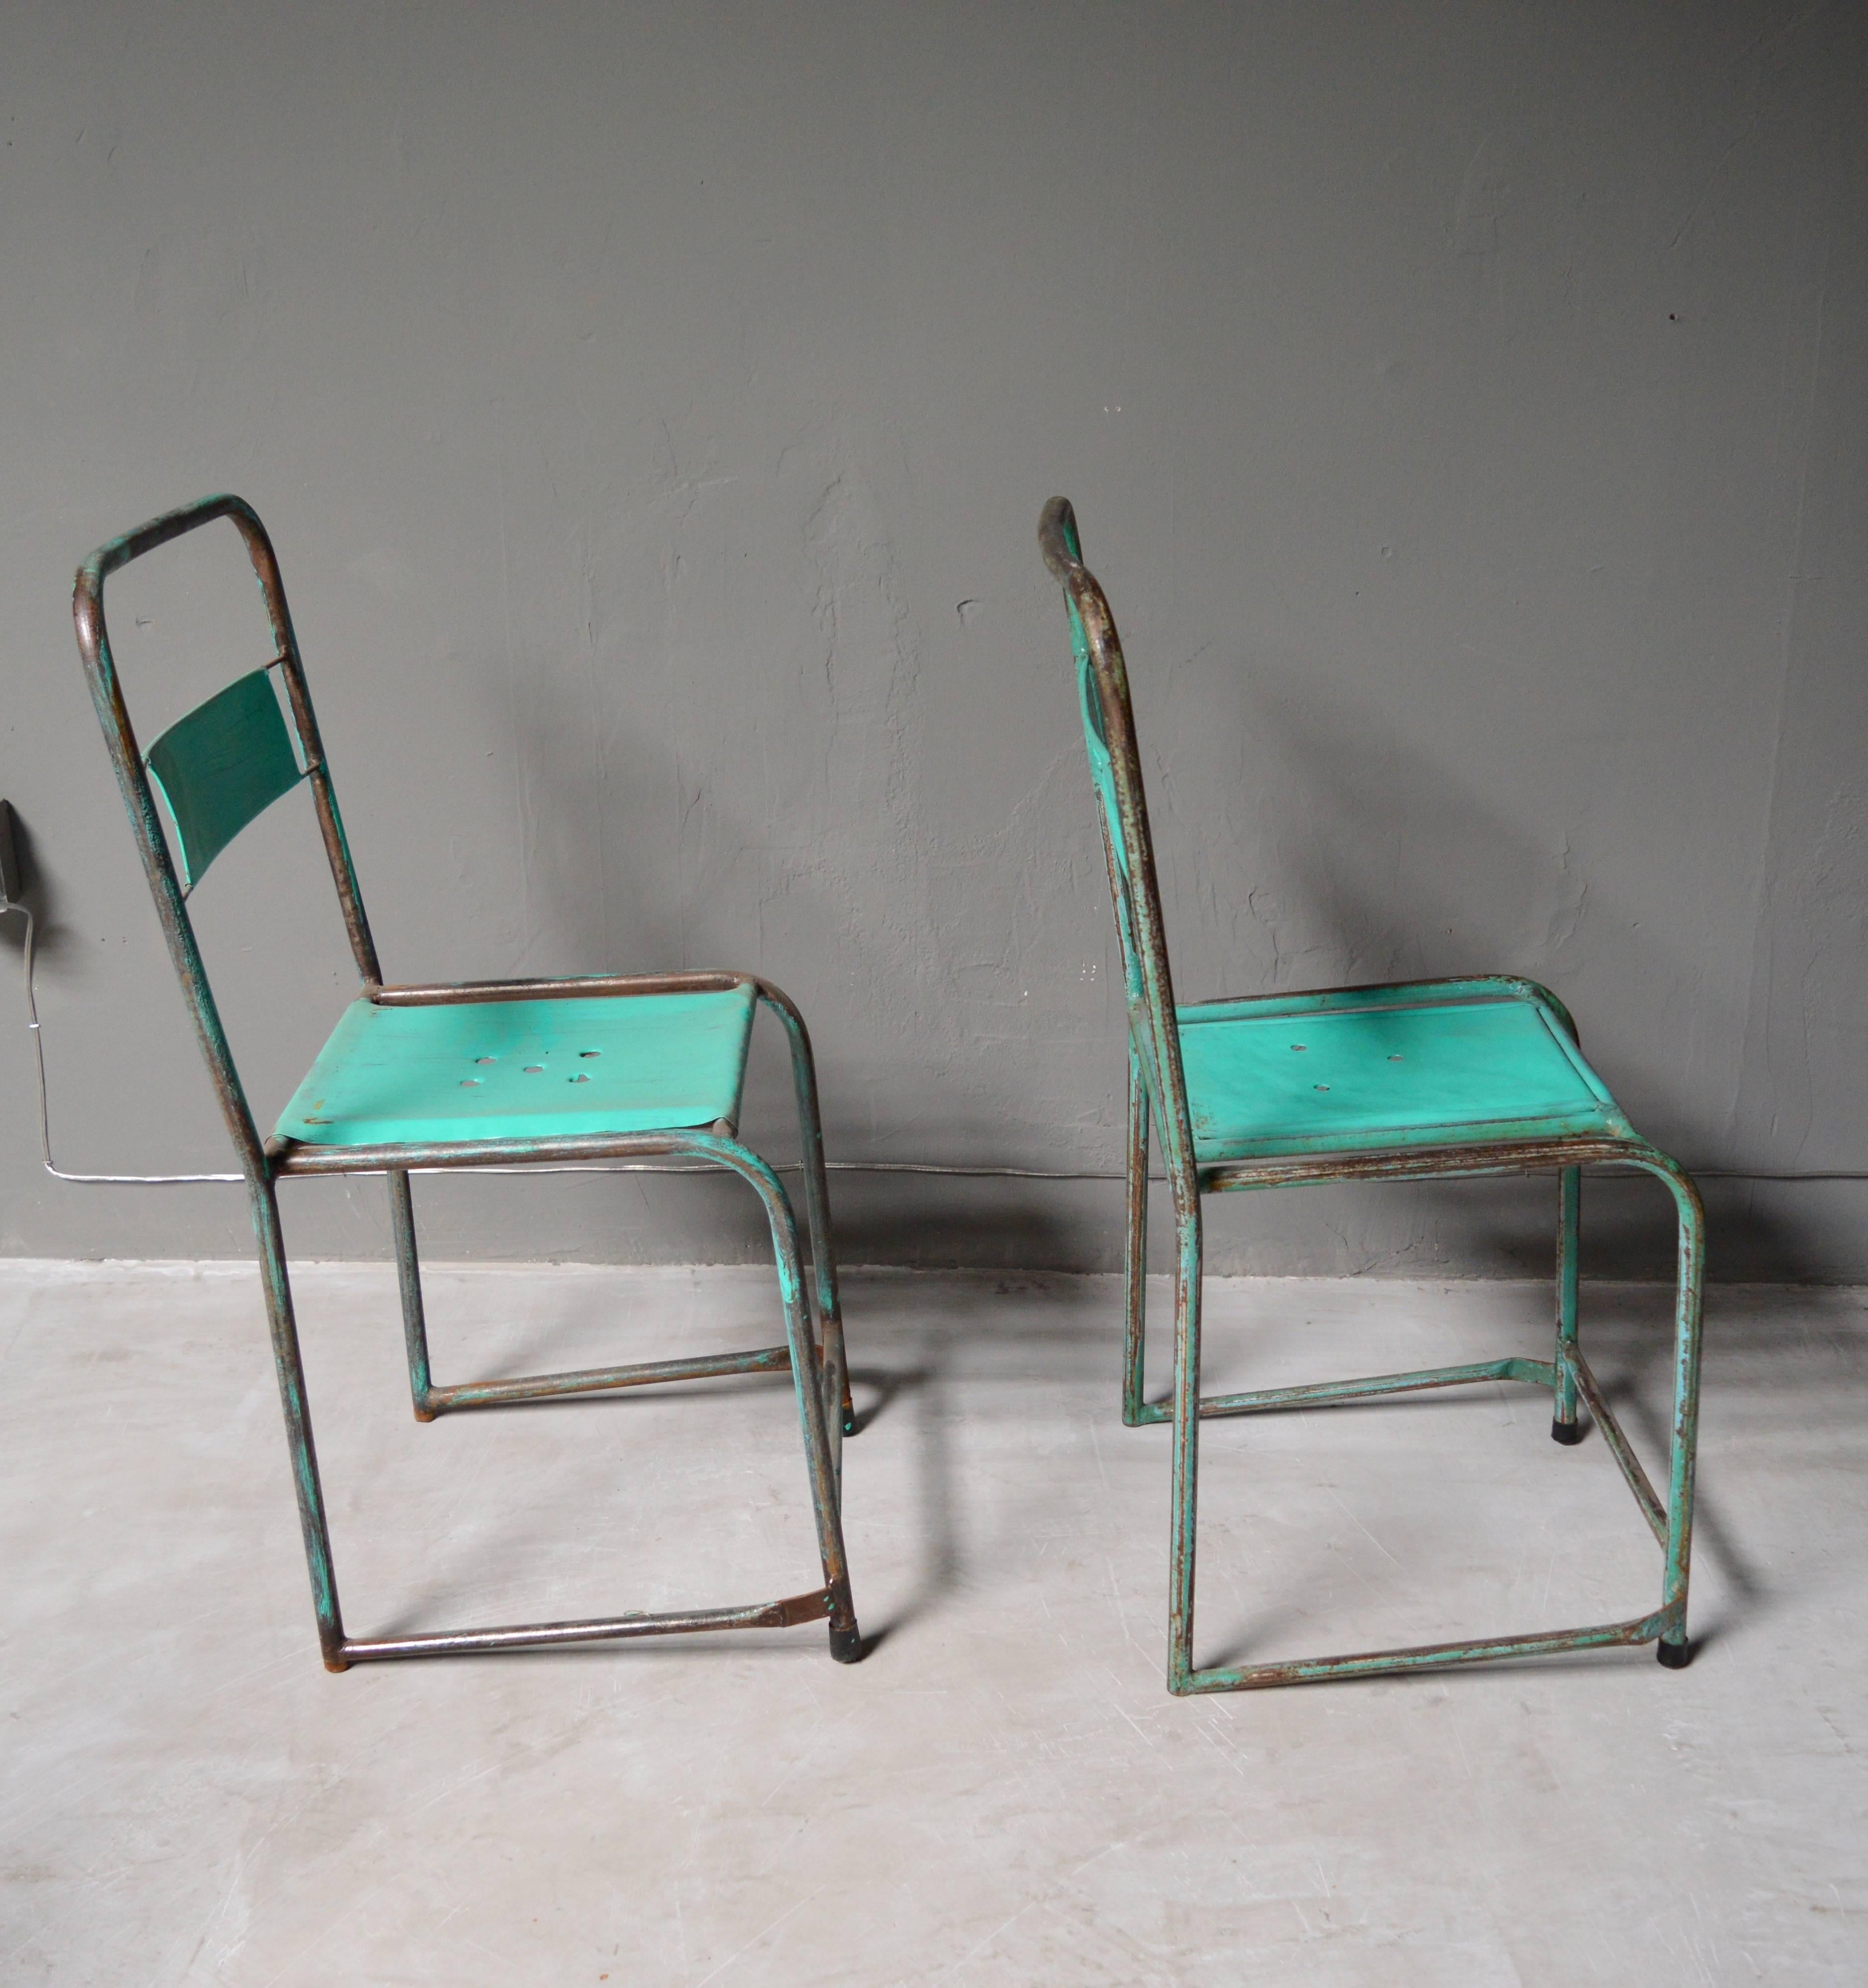 Great set of French metal school chairs. Great patina and age to metal. Each chair in its own state of vintage condition. Very unusual frame. Surprisingly comfortable. Perfect indoors or out. Sold as a set of four. A set of four yellow school chairs